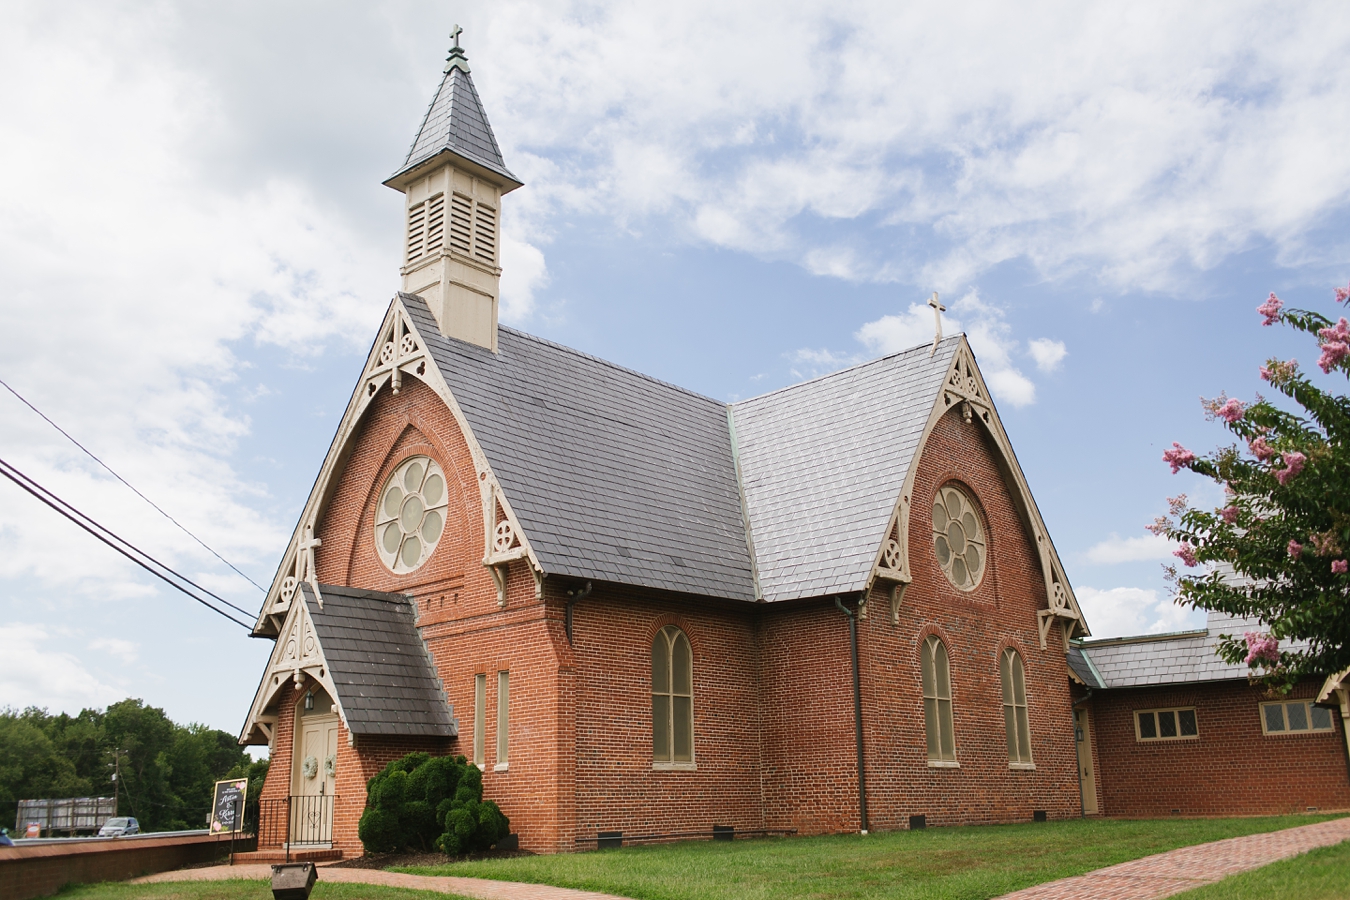 St. Peter the Apostle Church in Queenstown, Maryland